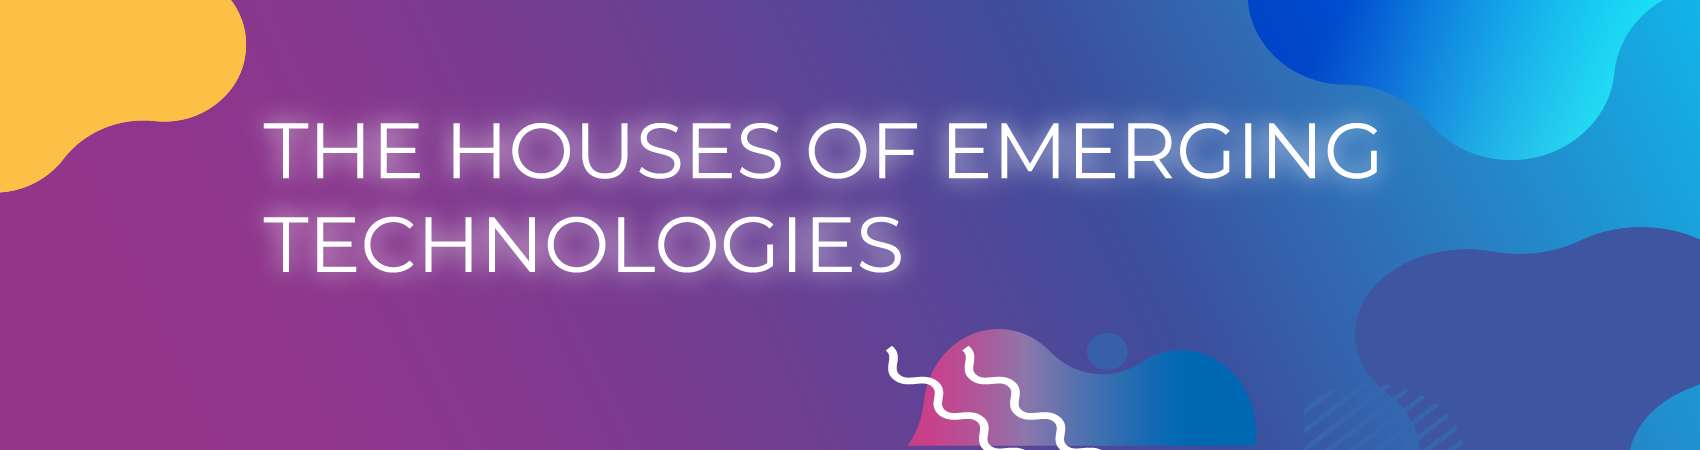 Houses of Emerging Technologies